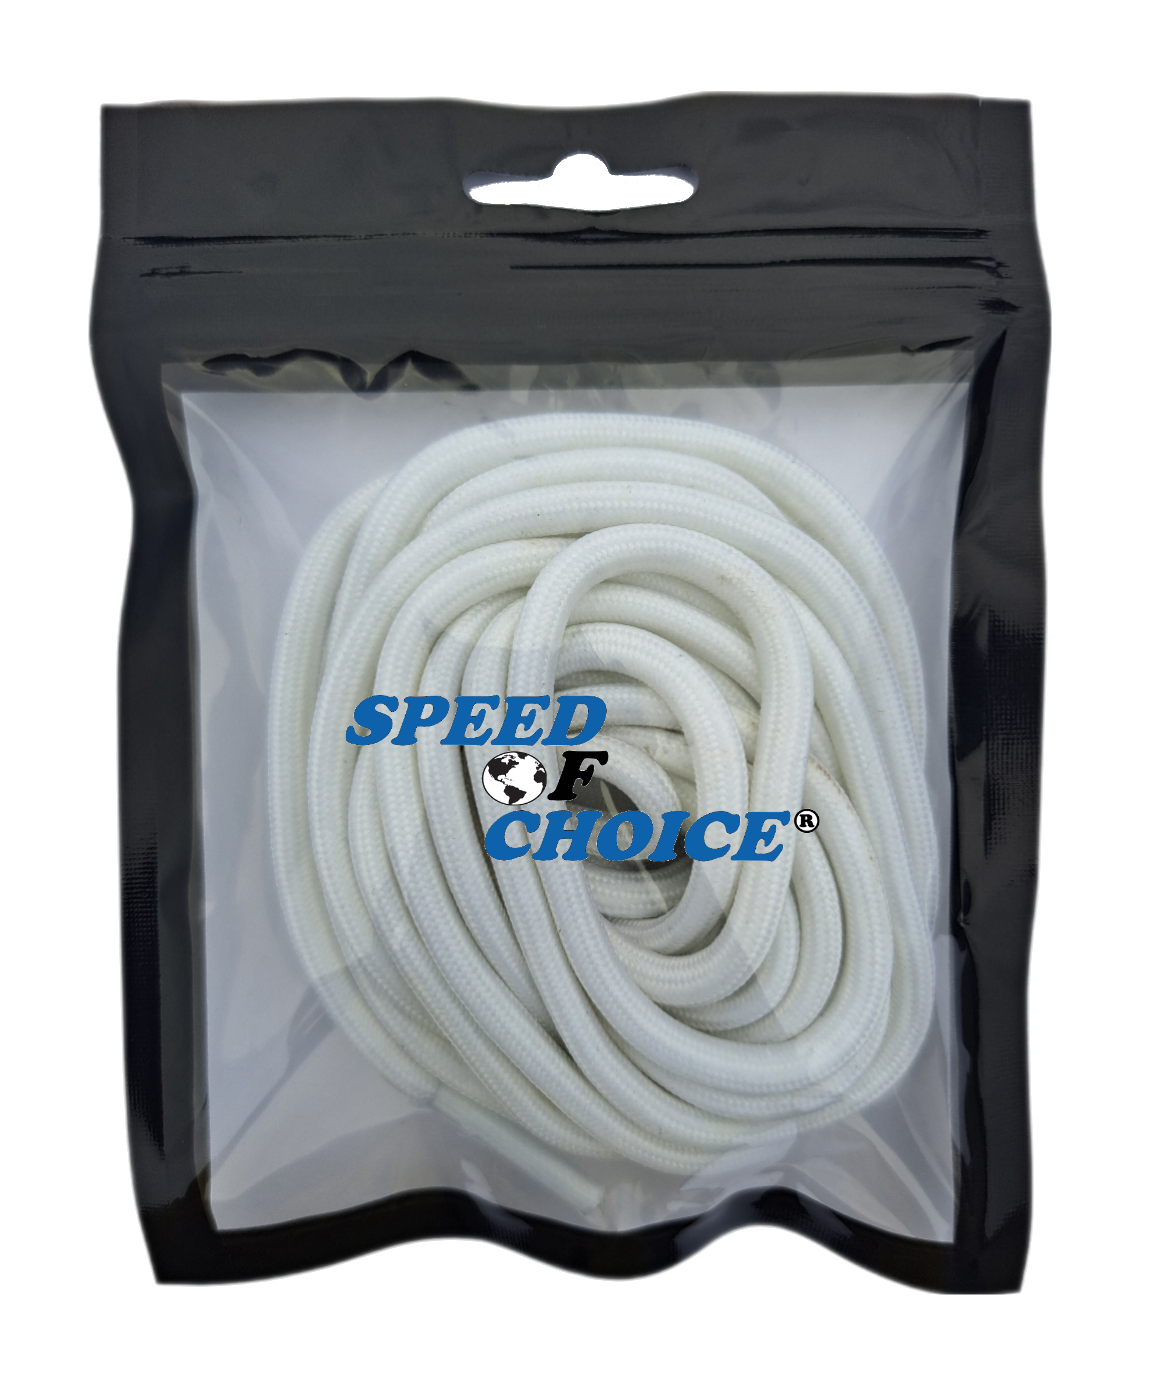 GLOW  LACES - SPEED OF CHOICE® 